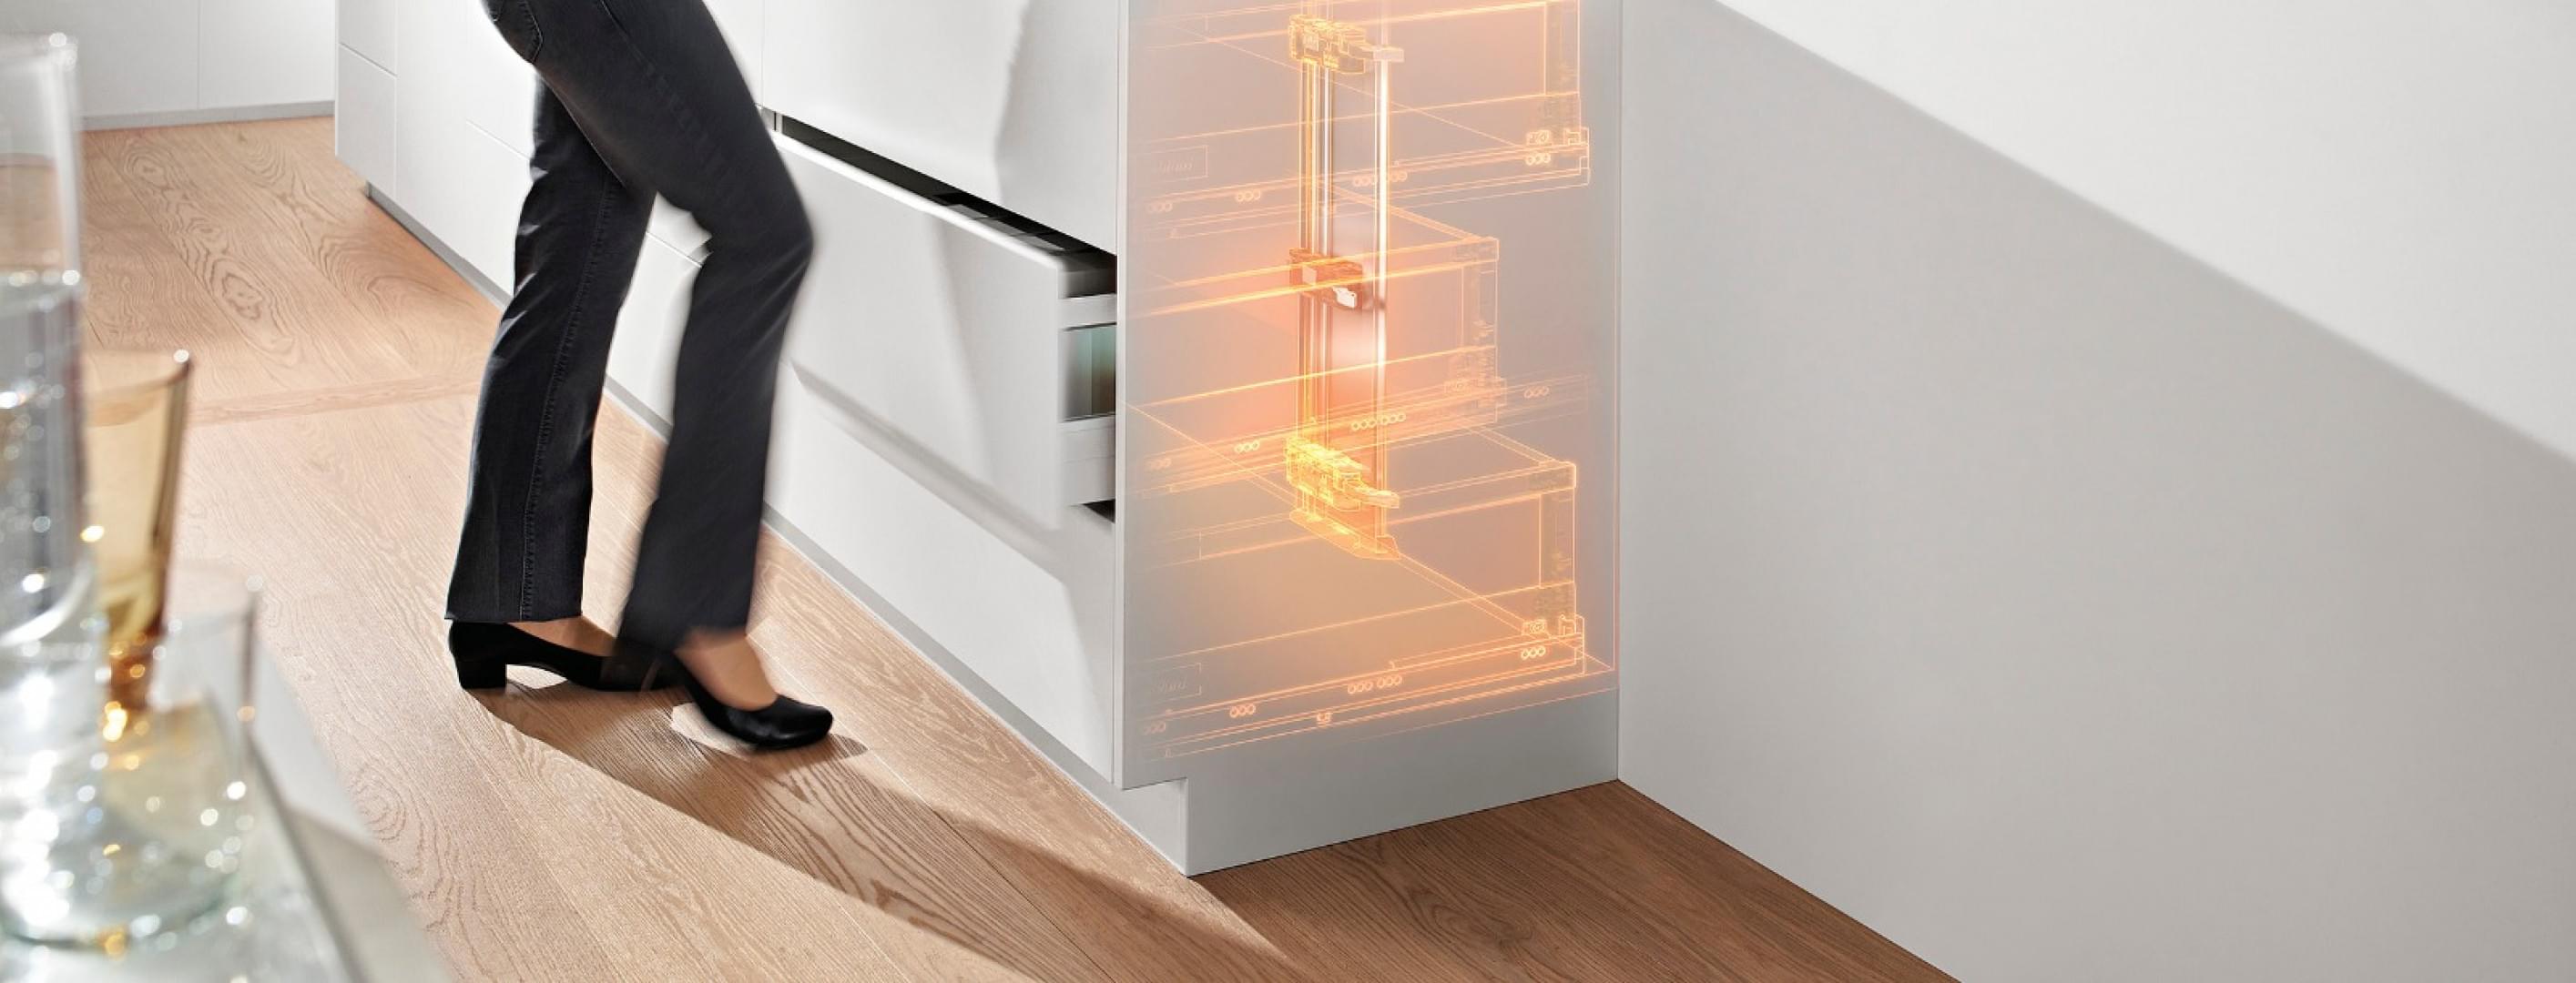 SERVO-DRIVE for TANDEMBOX from Blum